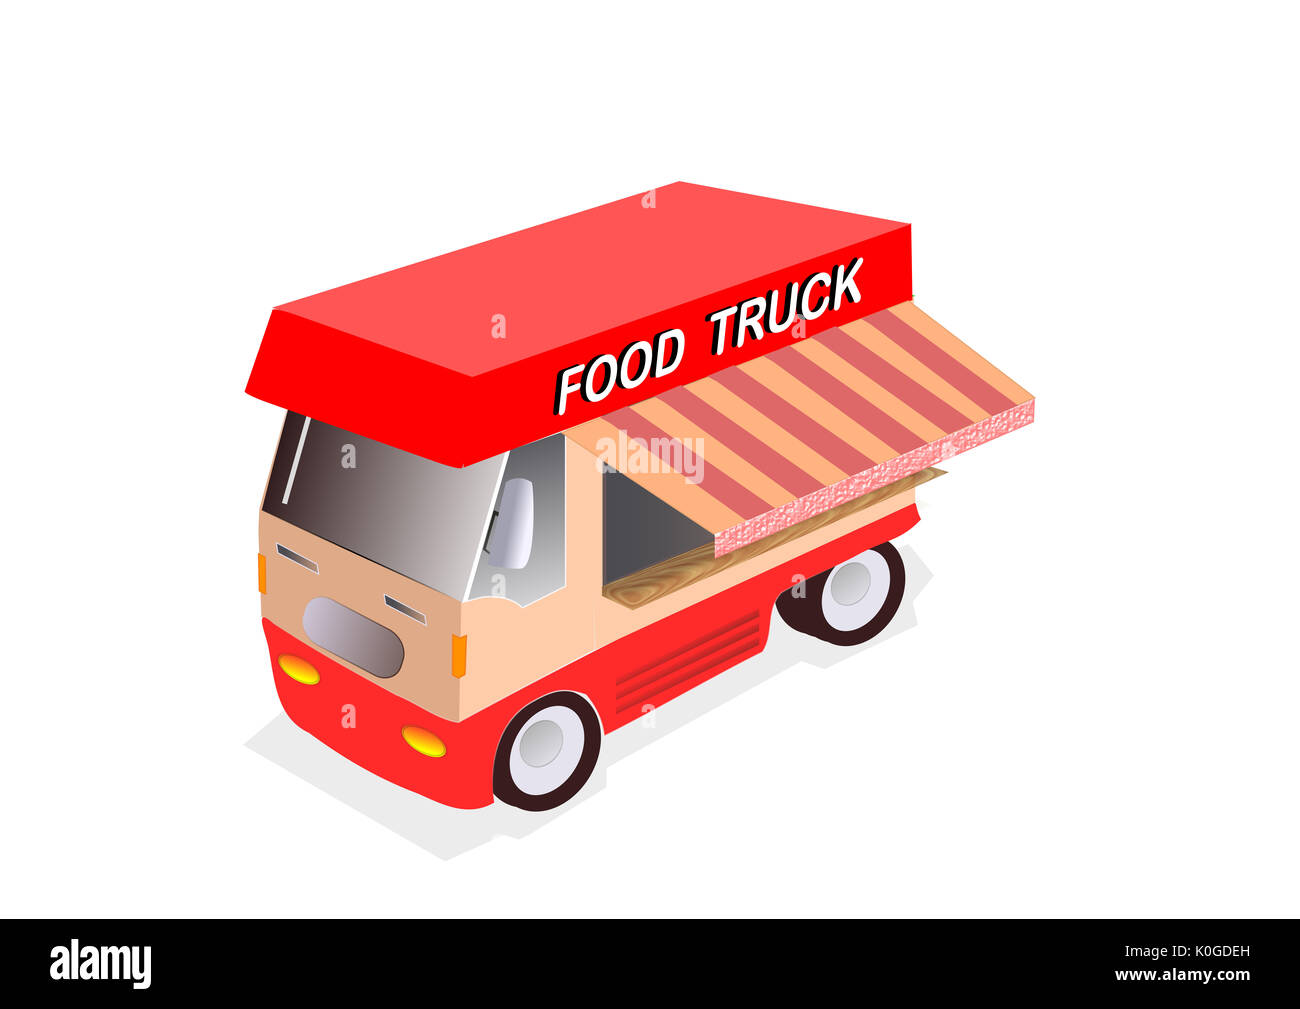 illustration of red food truck on white background Stock Photo